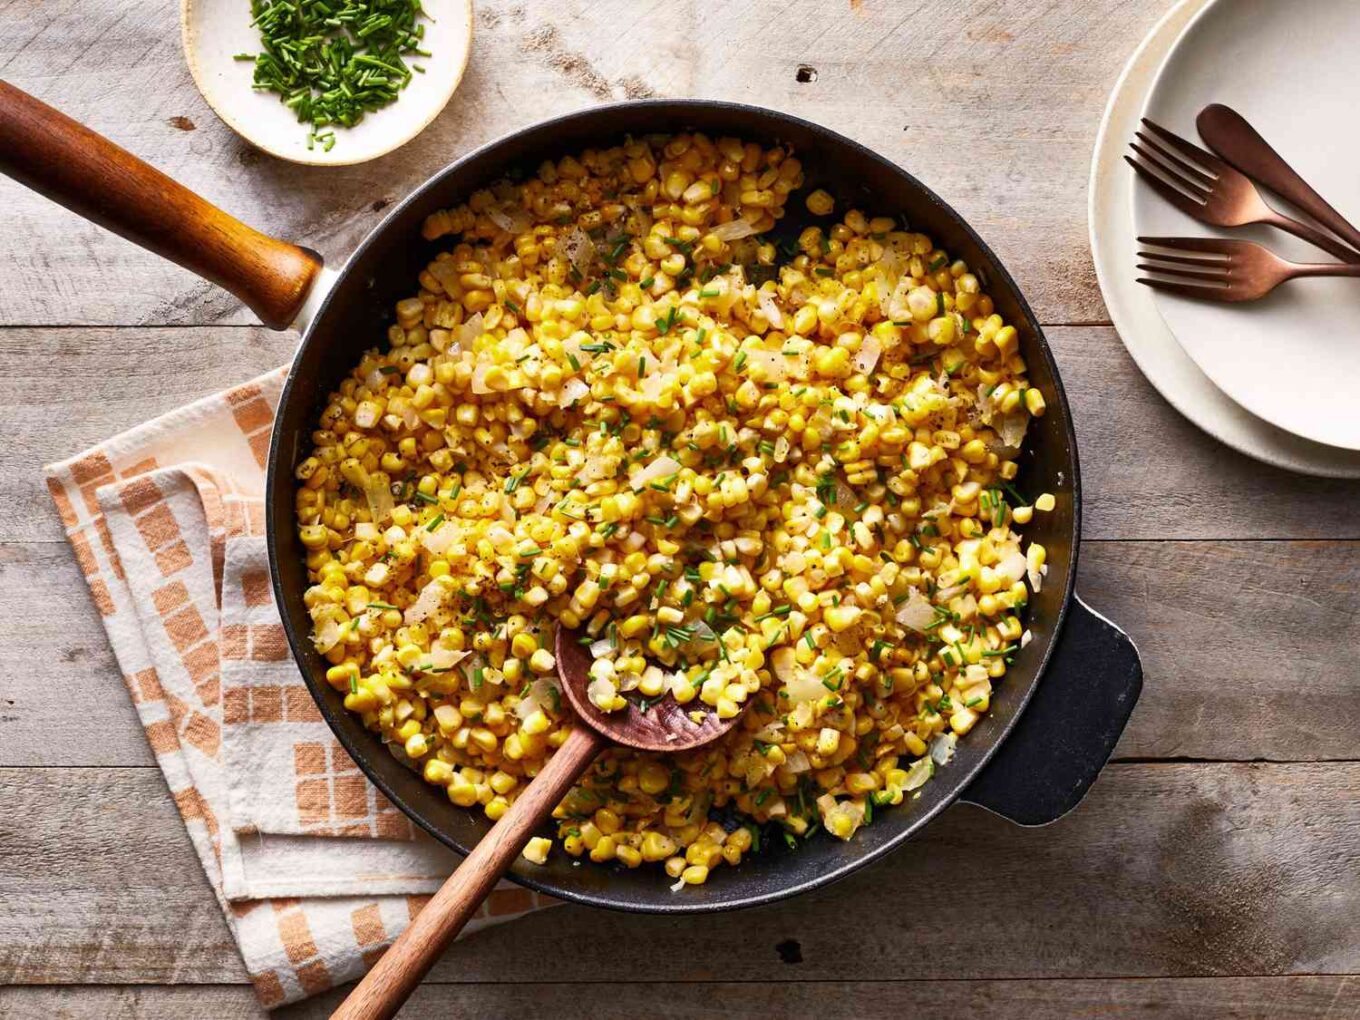 Easy Skillet Fried Corn Recipe to Make at Home